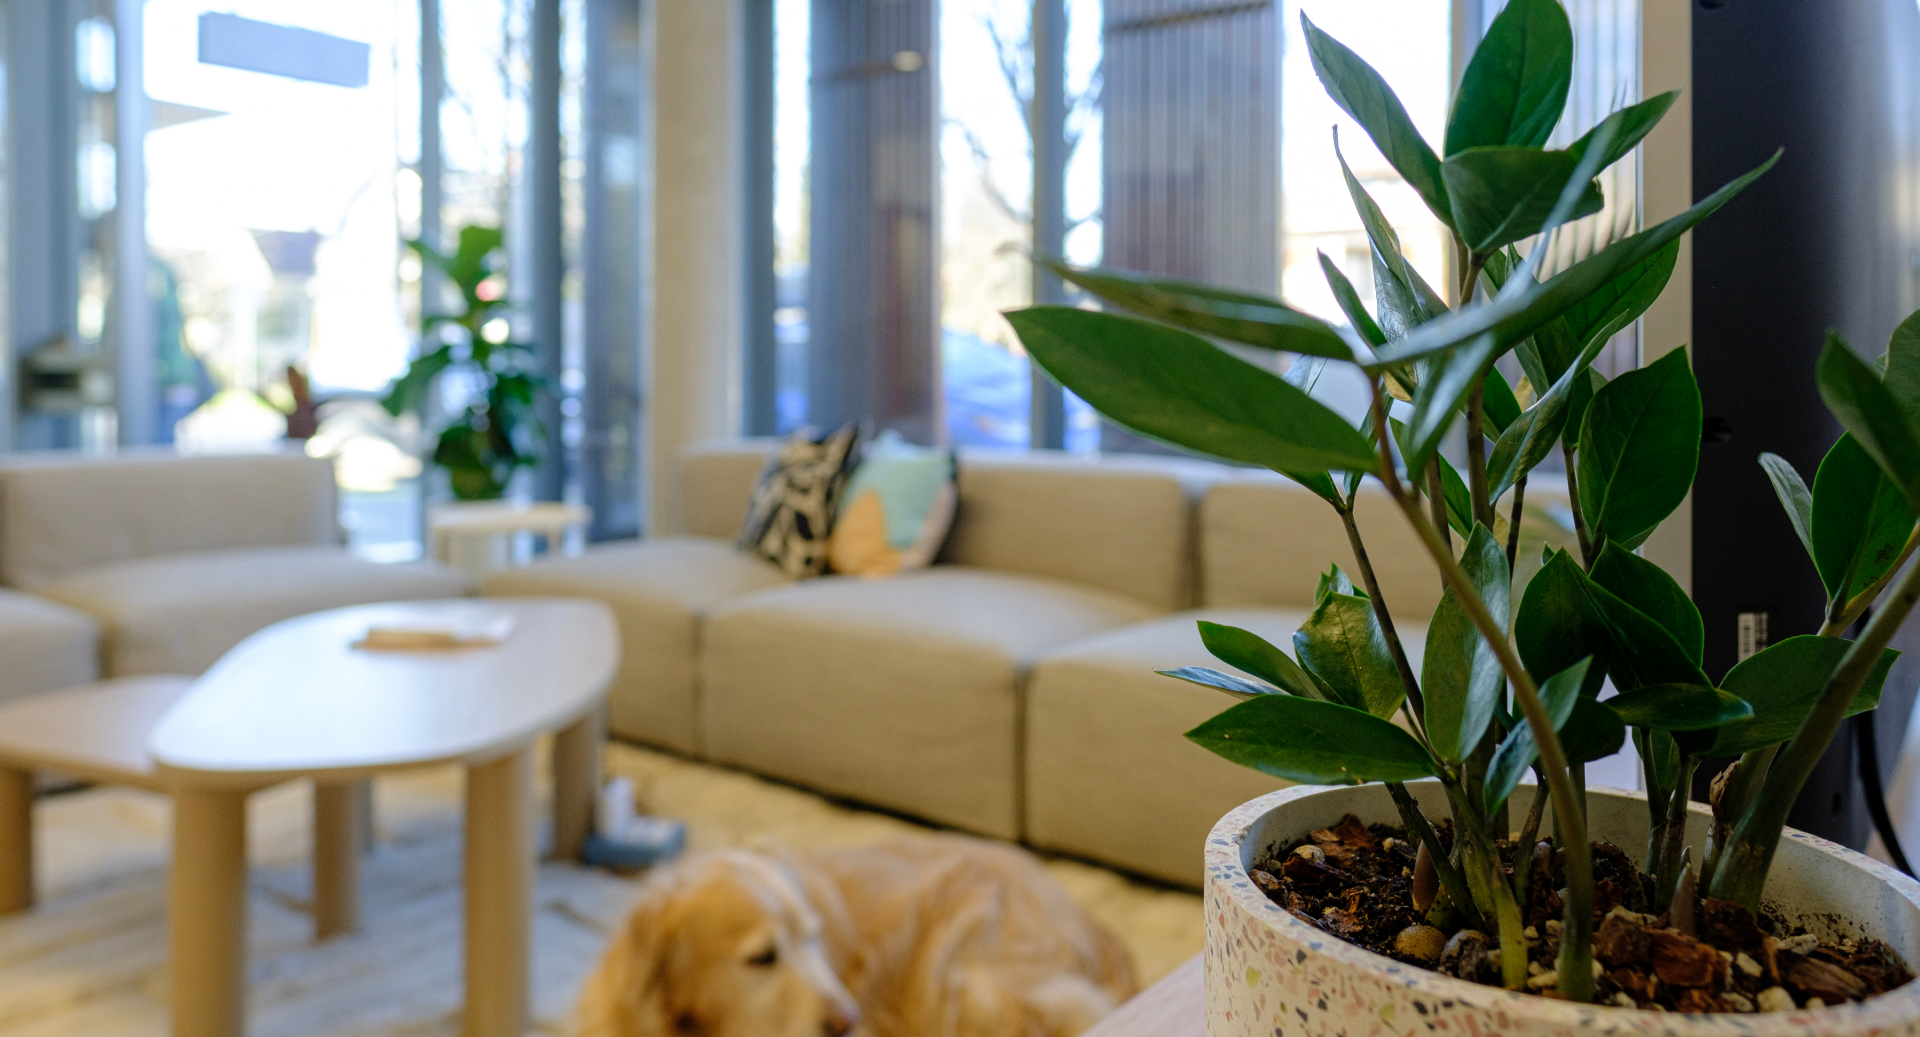 Photo of the office lounge area, plants, and Ida, the office golden retriever.